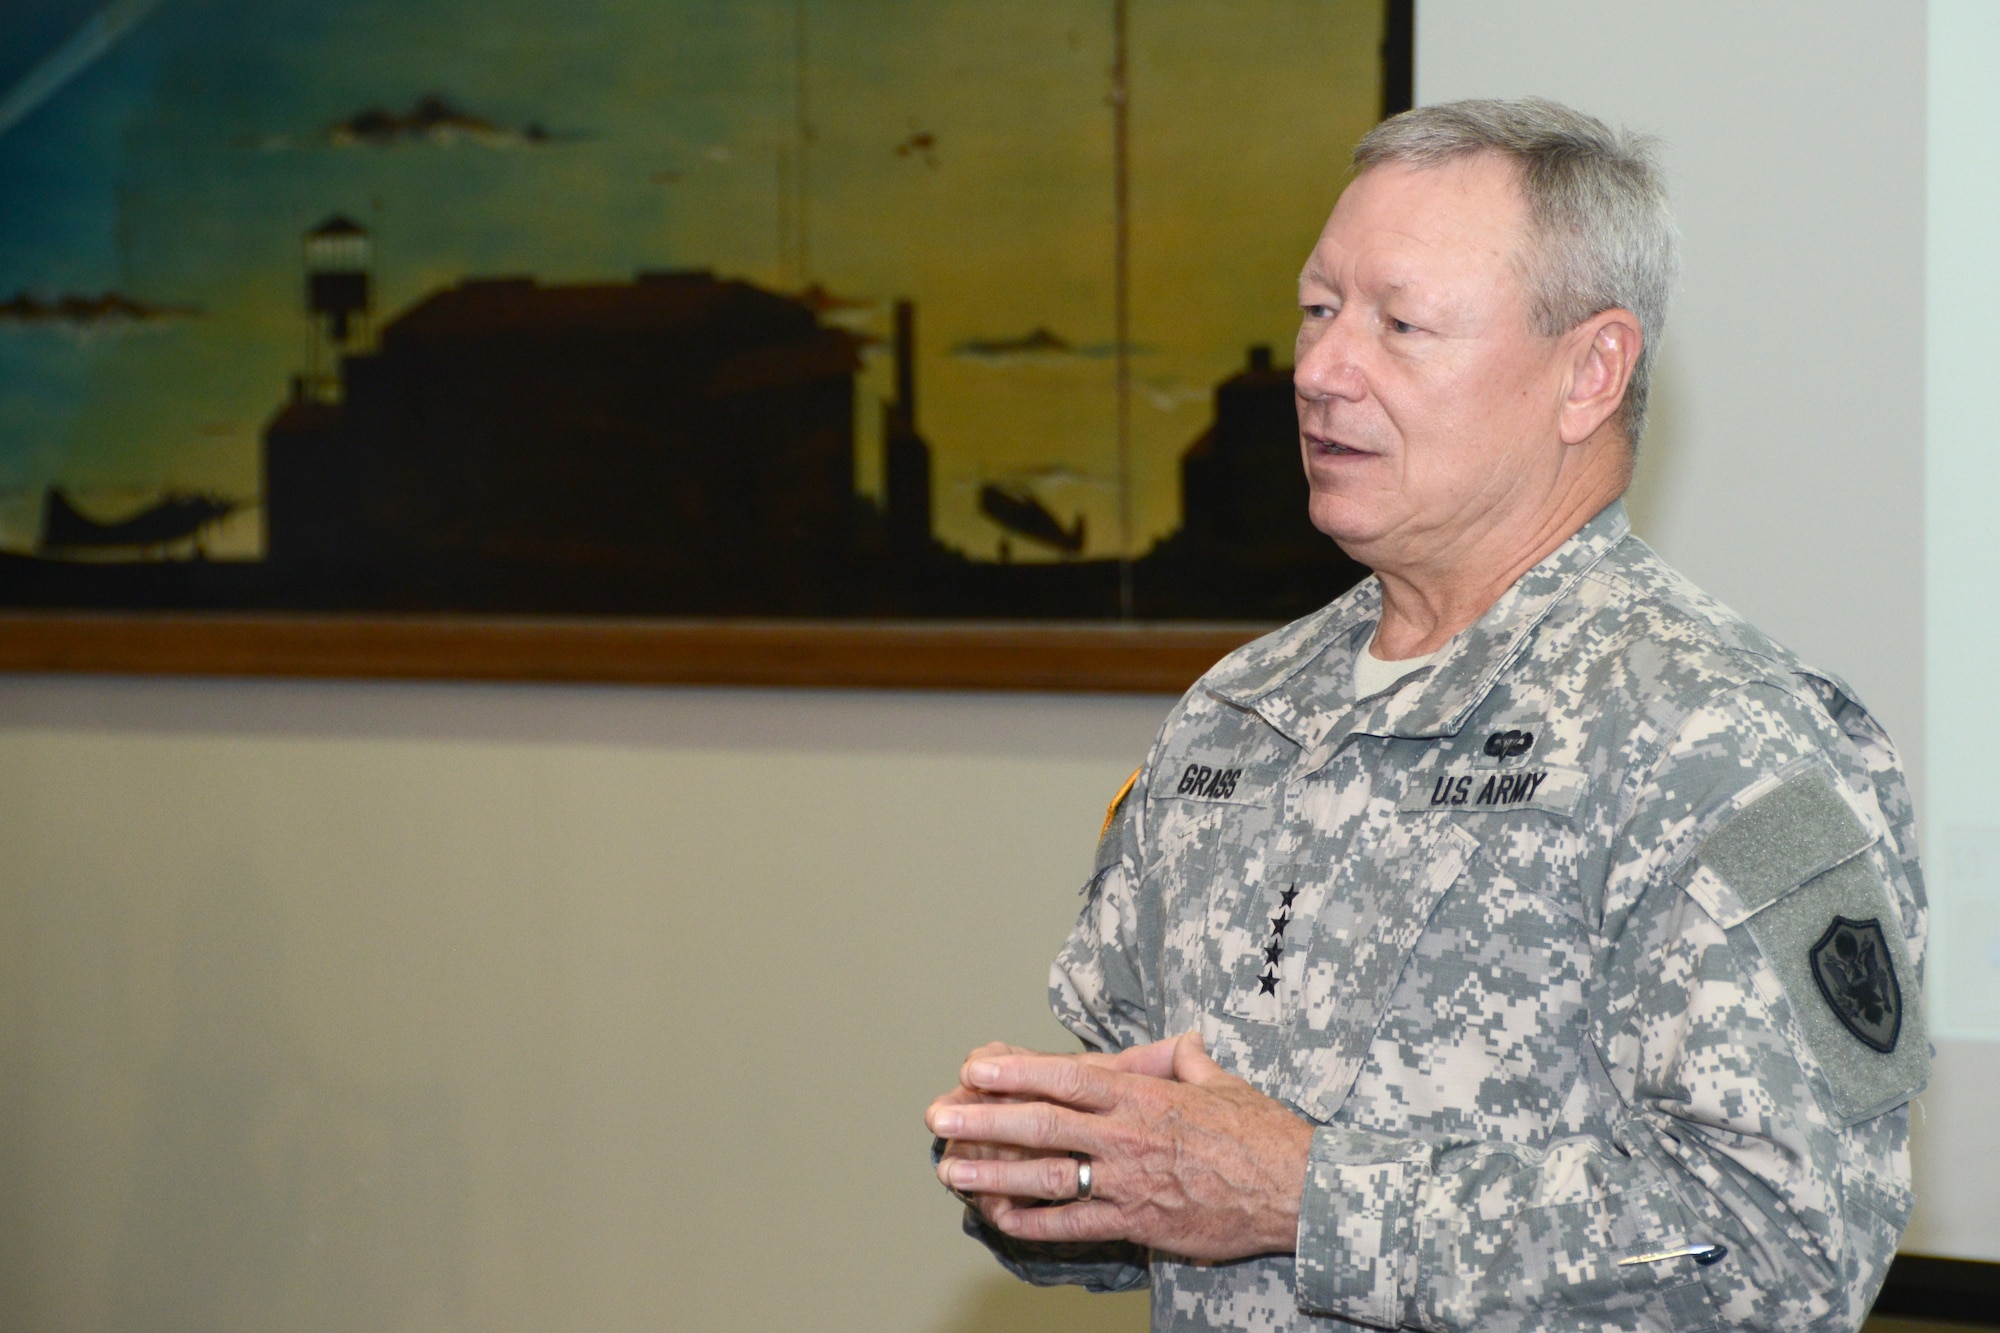 Chief of the National Guard Bureau, General Frank J. Grass conducts a town hall meeting, emphasizing the importance of being in the Guard for Airmen at Bradley Air National Guard Base, East Granby, Conn, Sept. 9, 2014. This was the first time a Chief of the National Guard Bureau visited the Flying Yankees. (U.S. Air National Guard photo by Senior Airman Emmanuel Santiago)